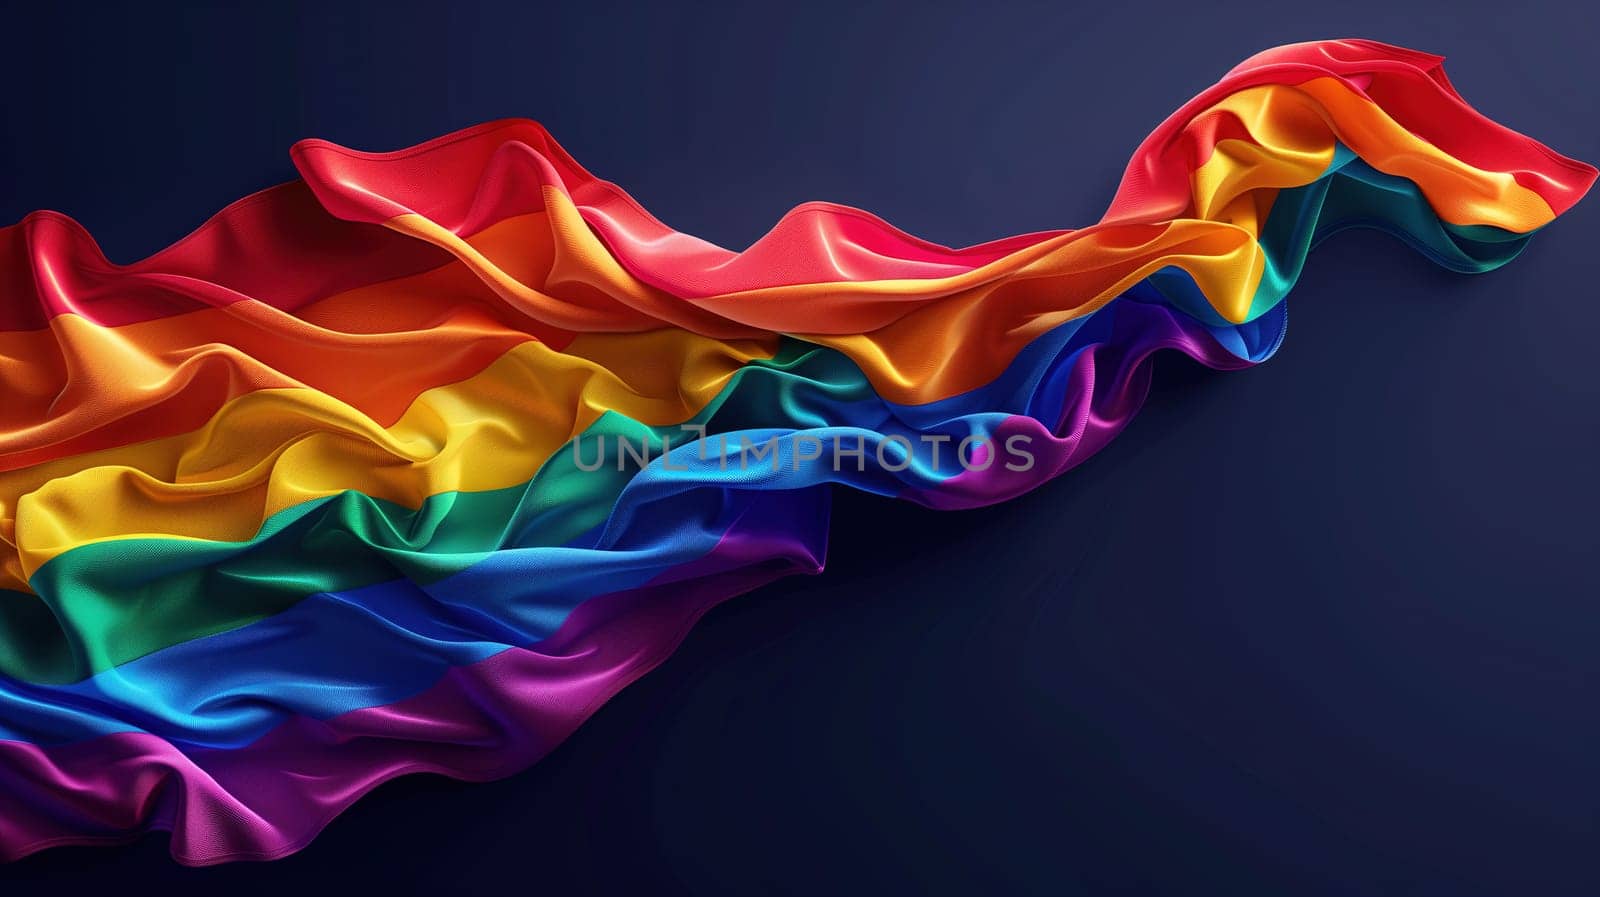 Vibrant Rainbow Pride Flag Unfurled Against a Dark Blue Background to Symbolize LGBT Rights by TRMK